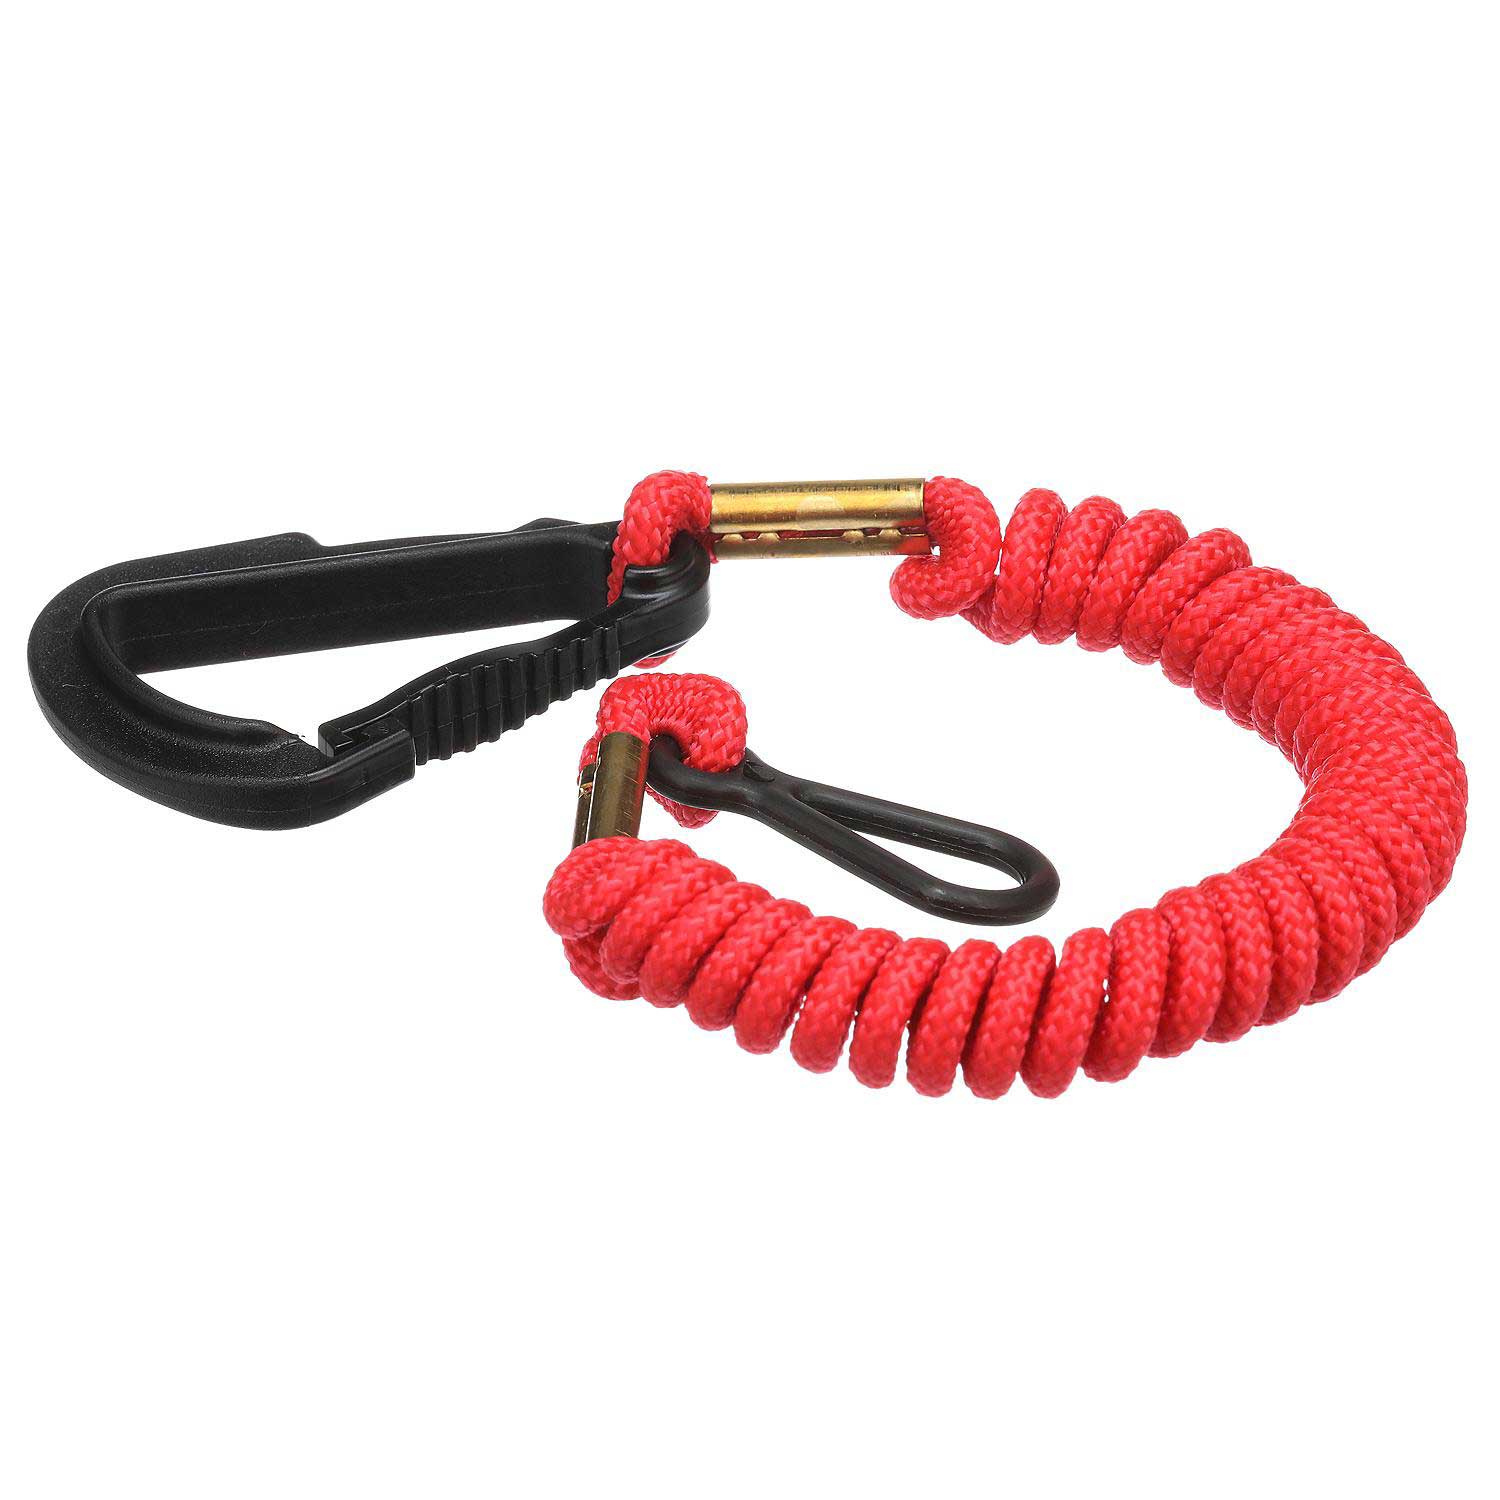 Diving Lanyard Wristband Safety Rope with Hook Metal Camera